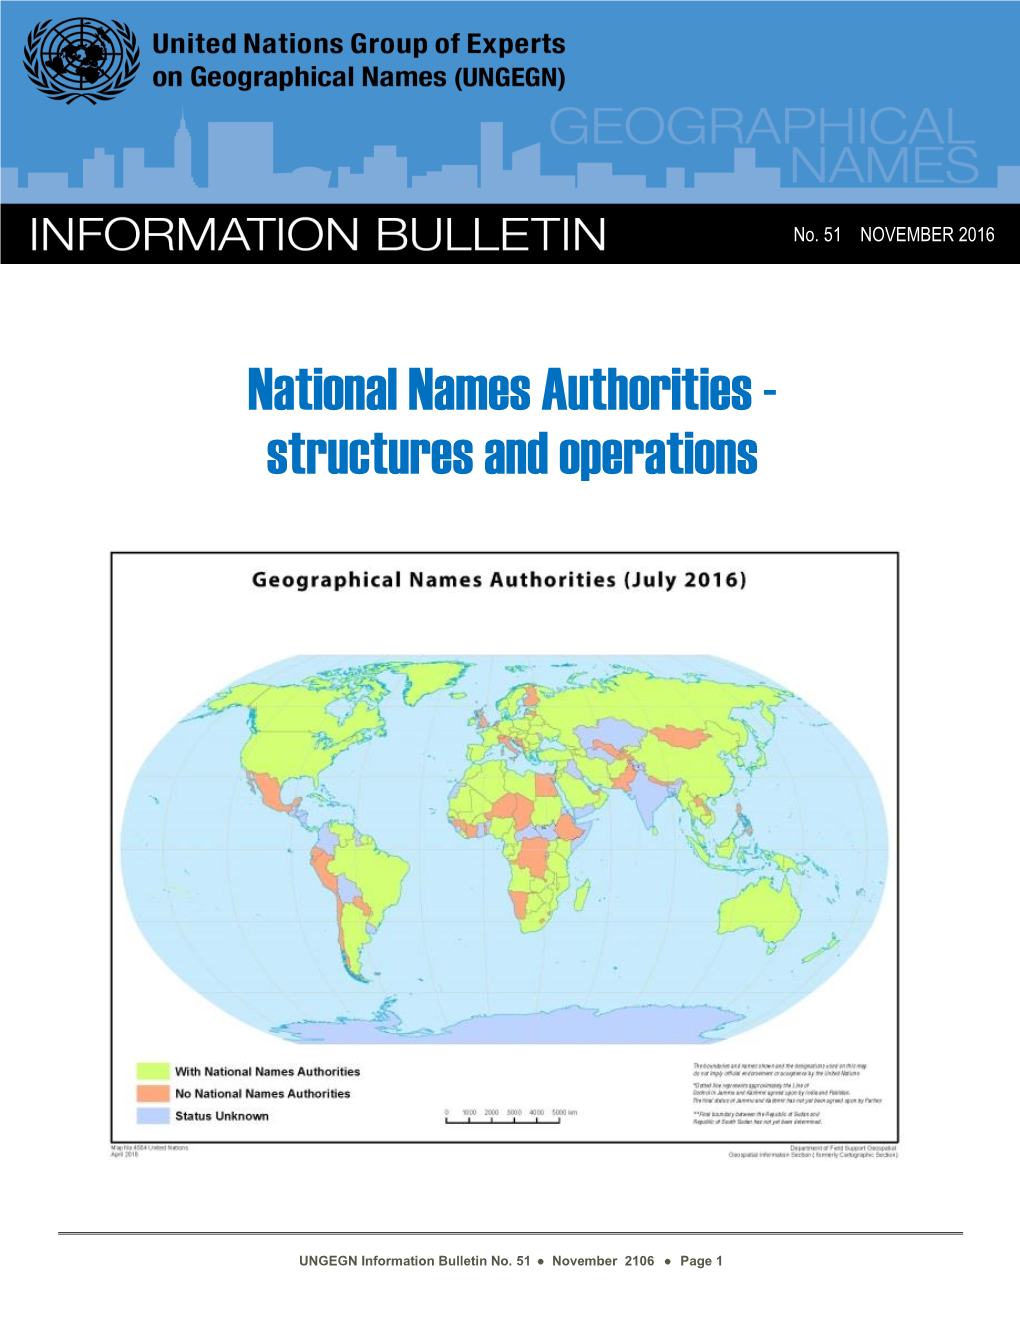 National Names Authorities - Structures and Operations